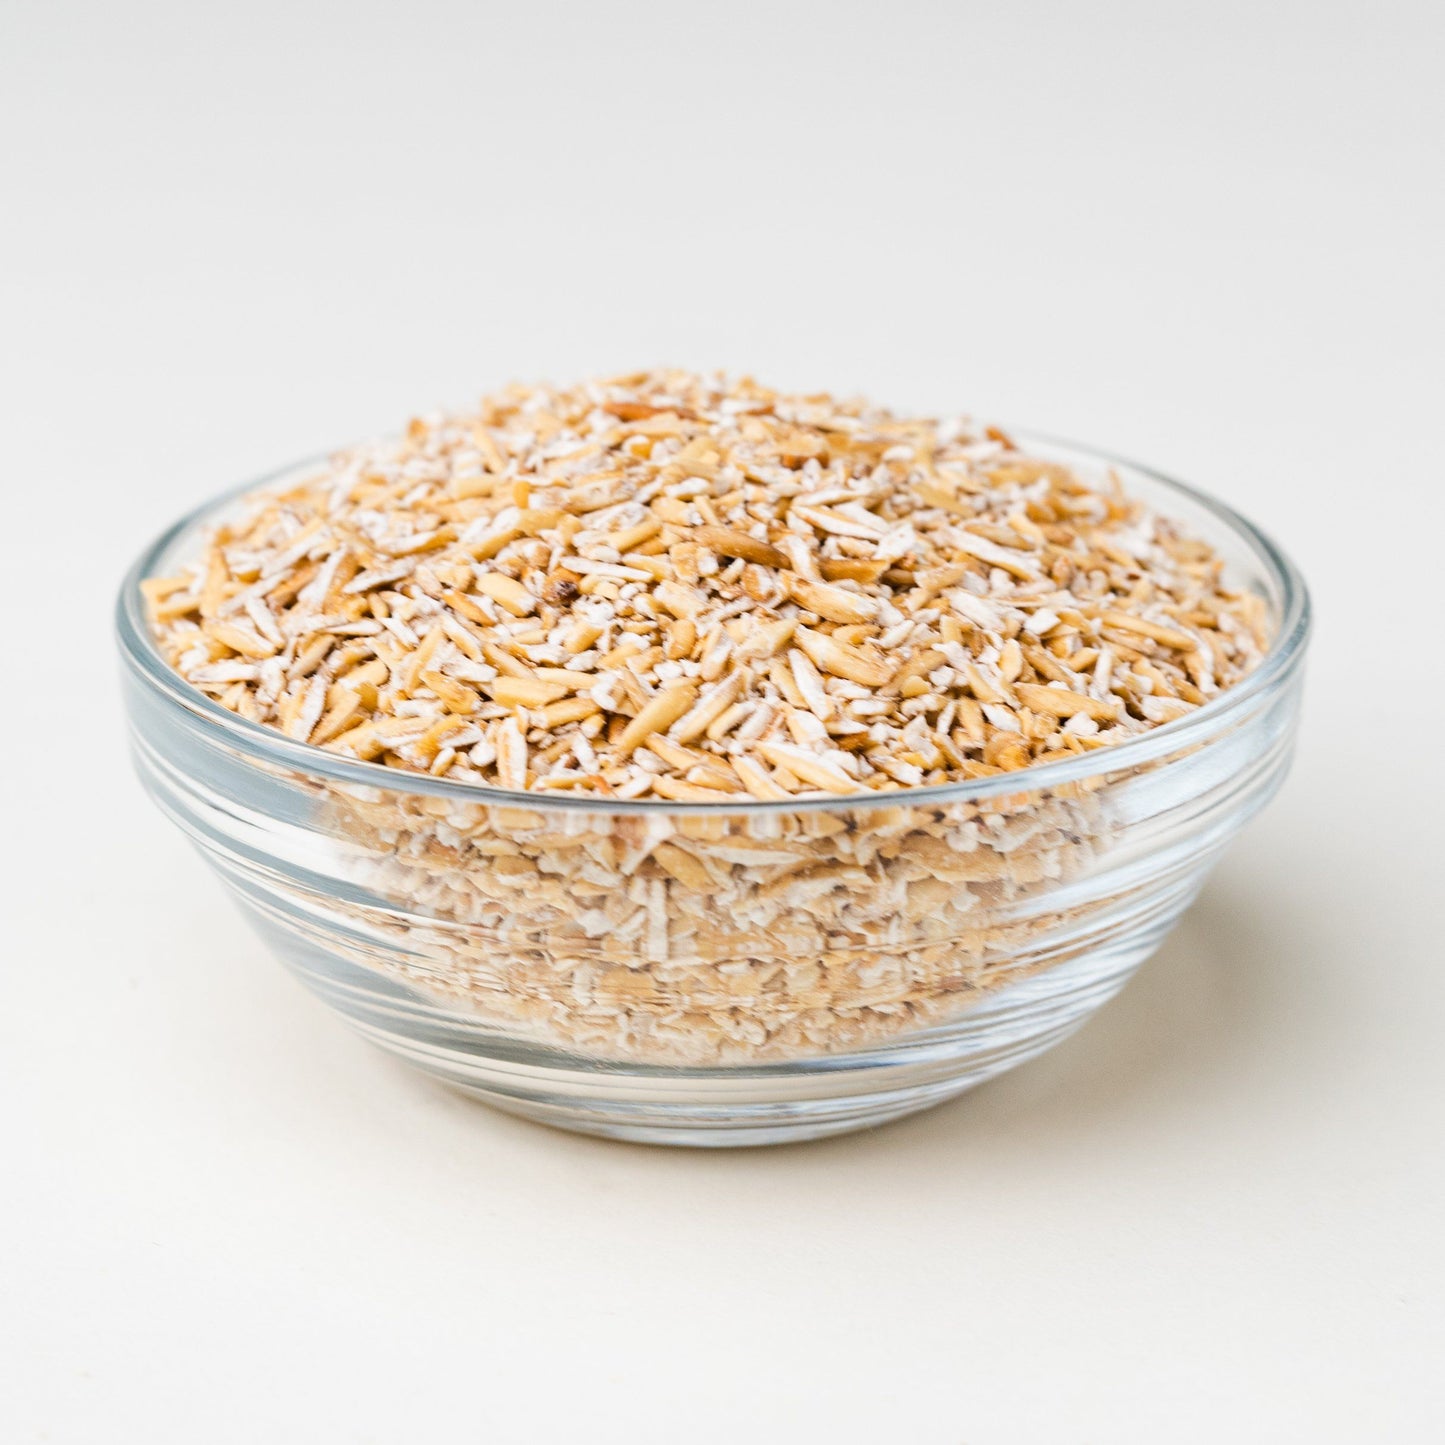 Organic 18th Century Toasted Stone Cut Oats by Dr. Cowan's Garden